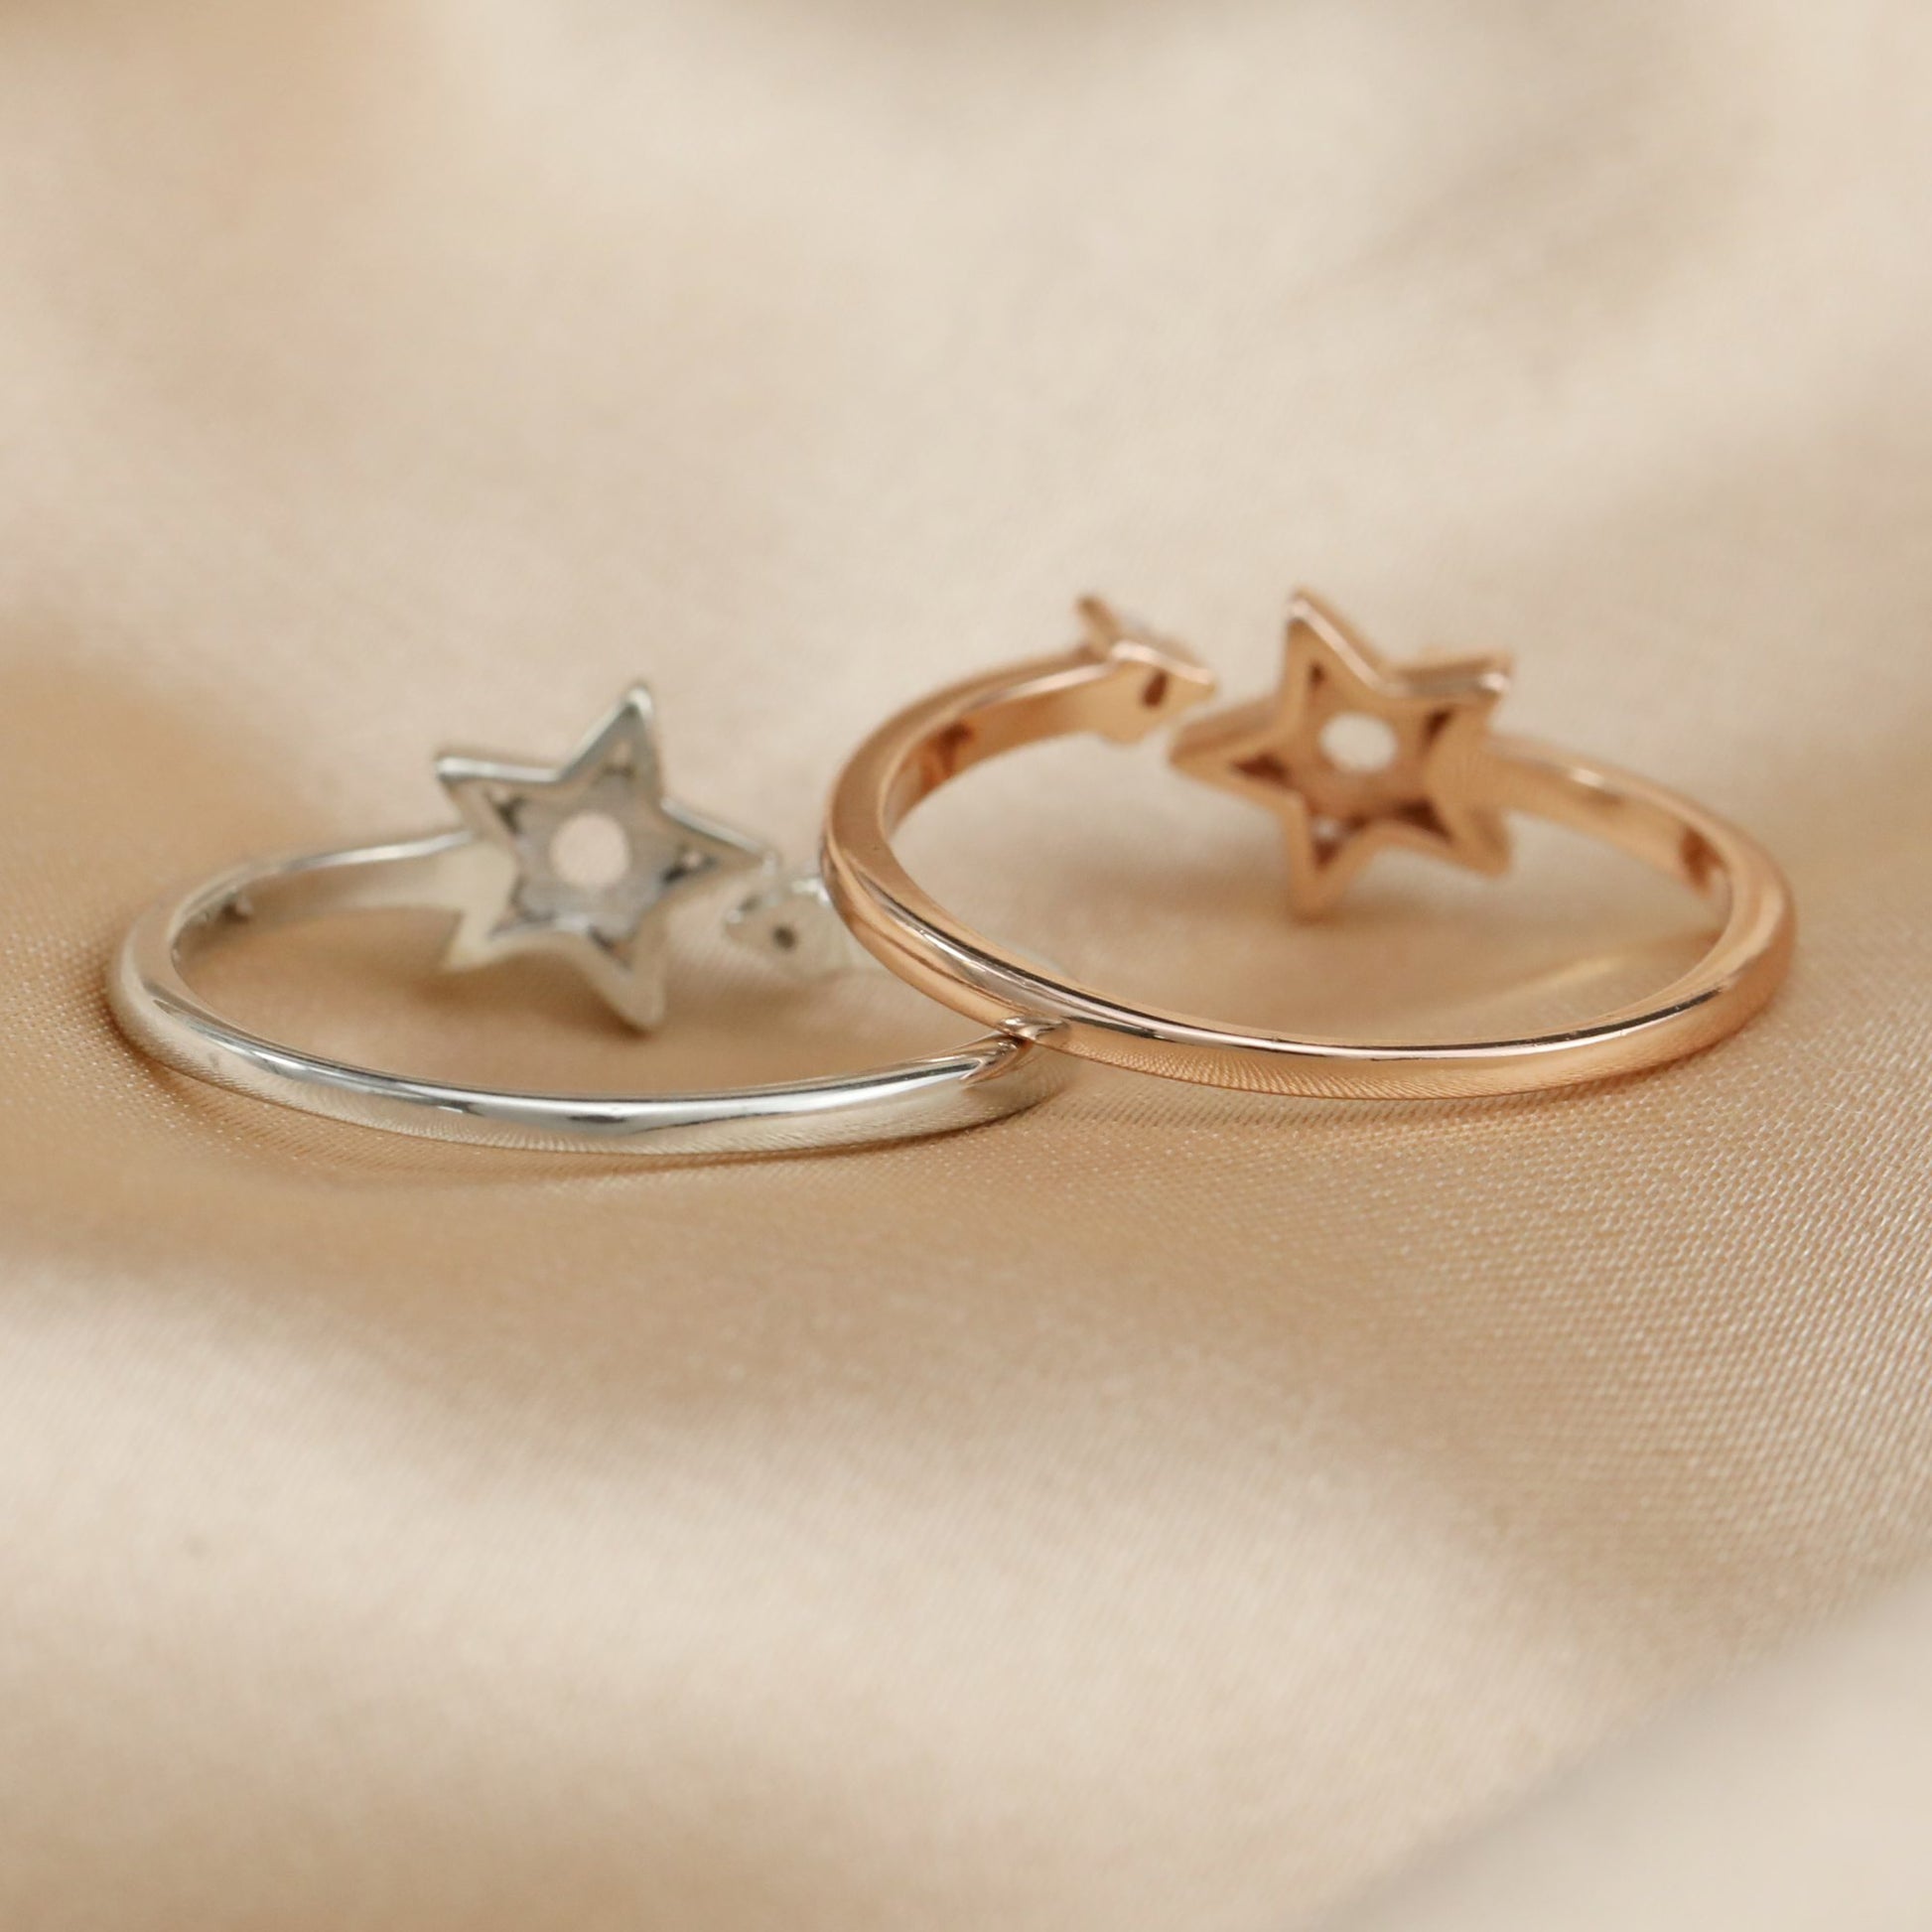 One silver and one rose gold one size fits all star and arrow semi mount for a round gem.